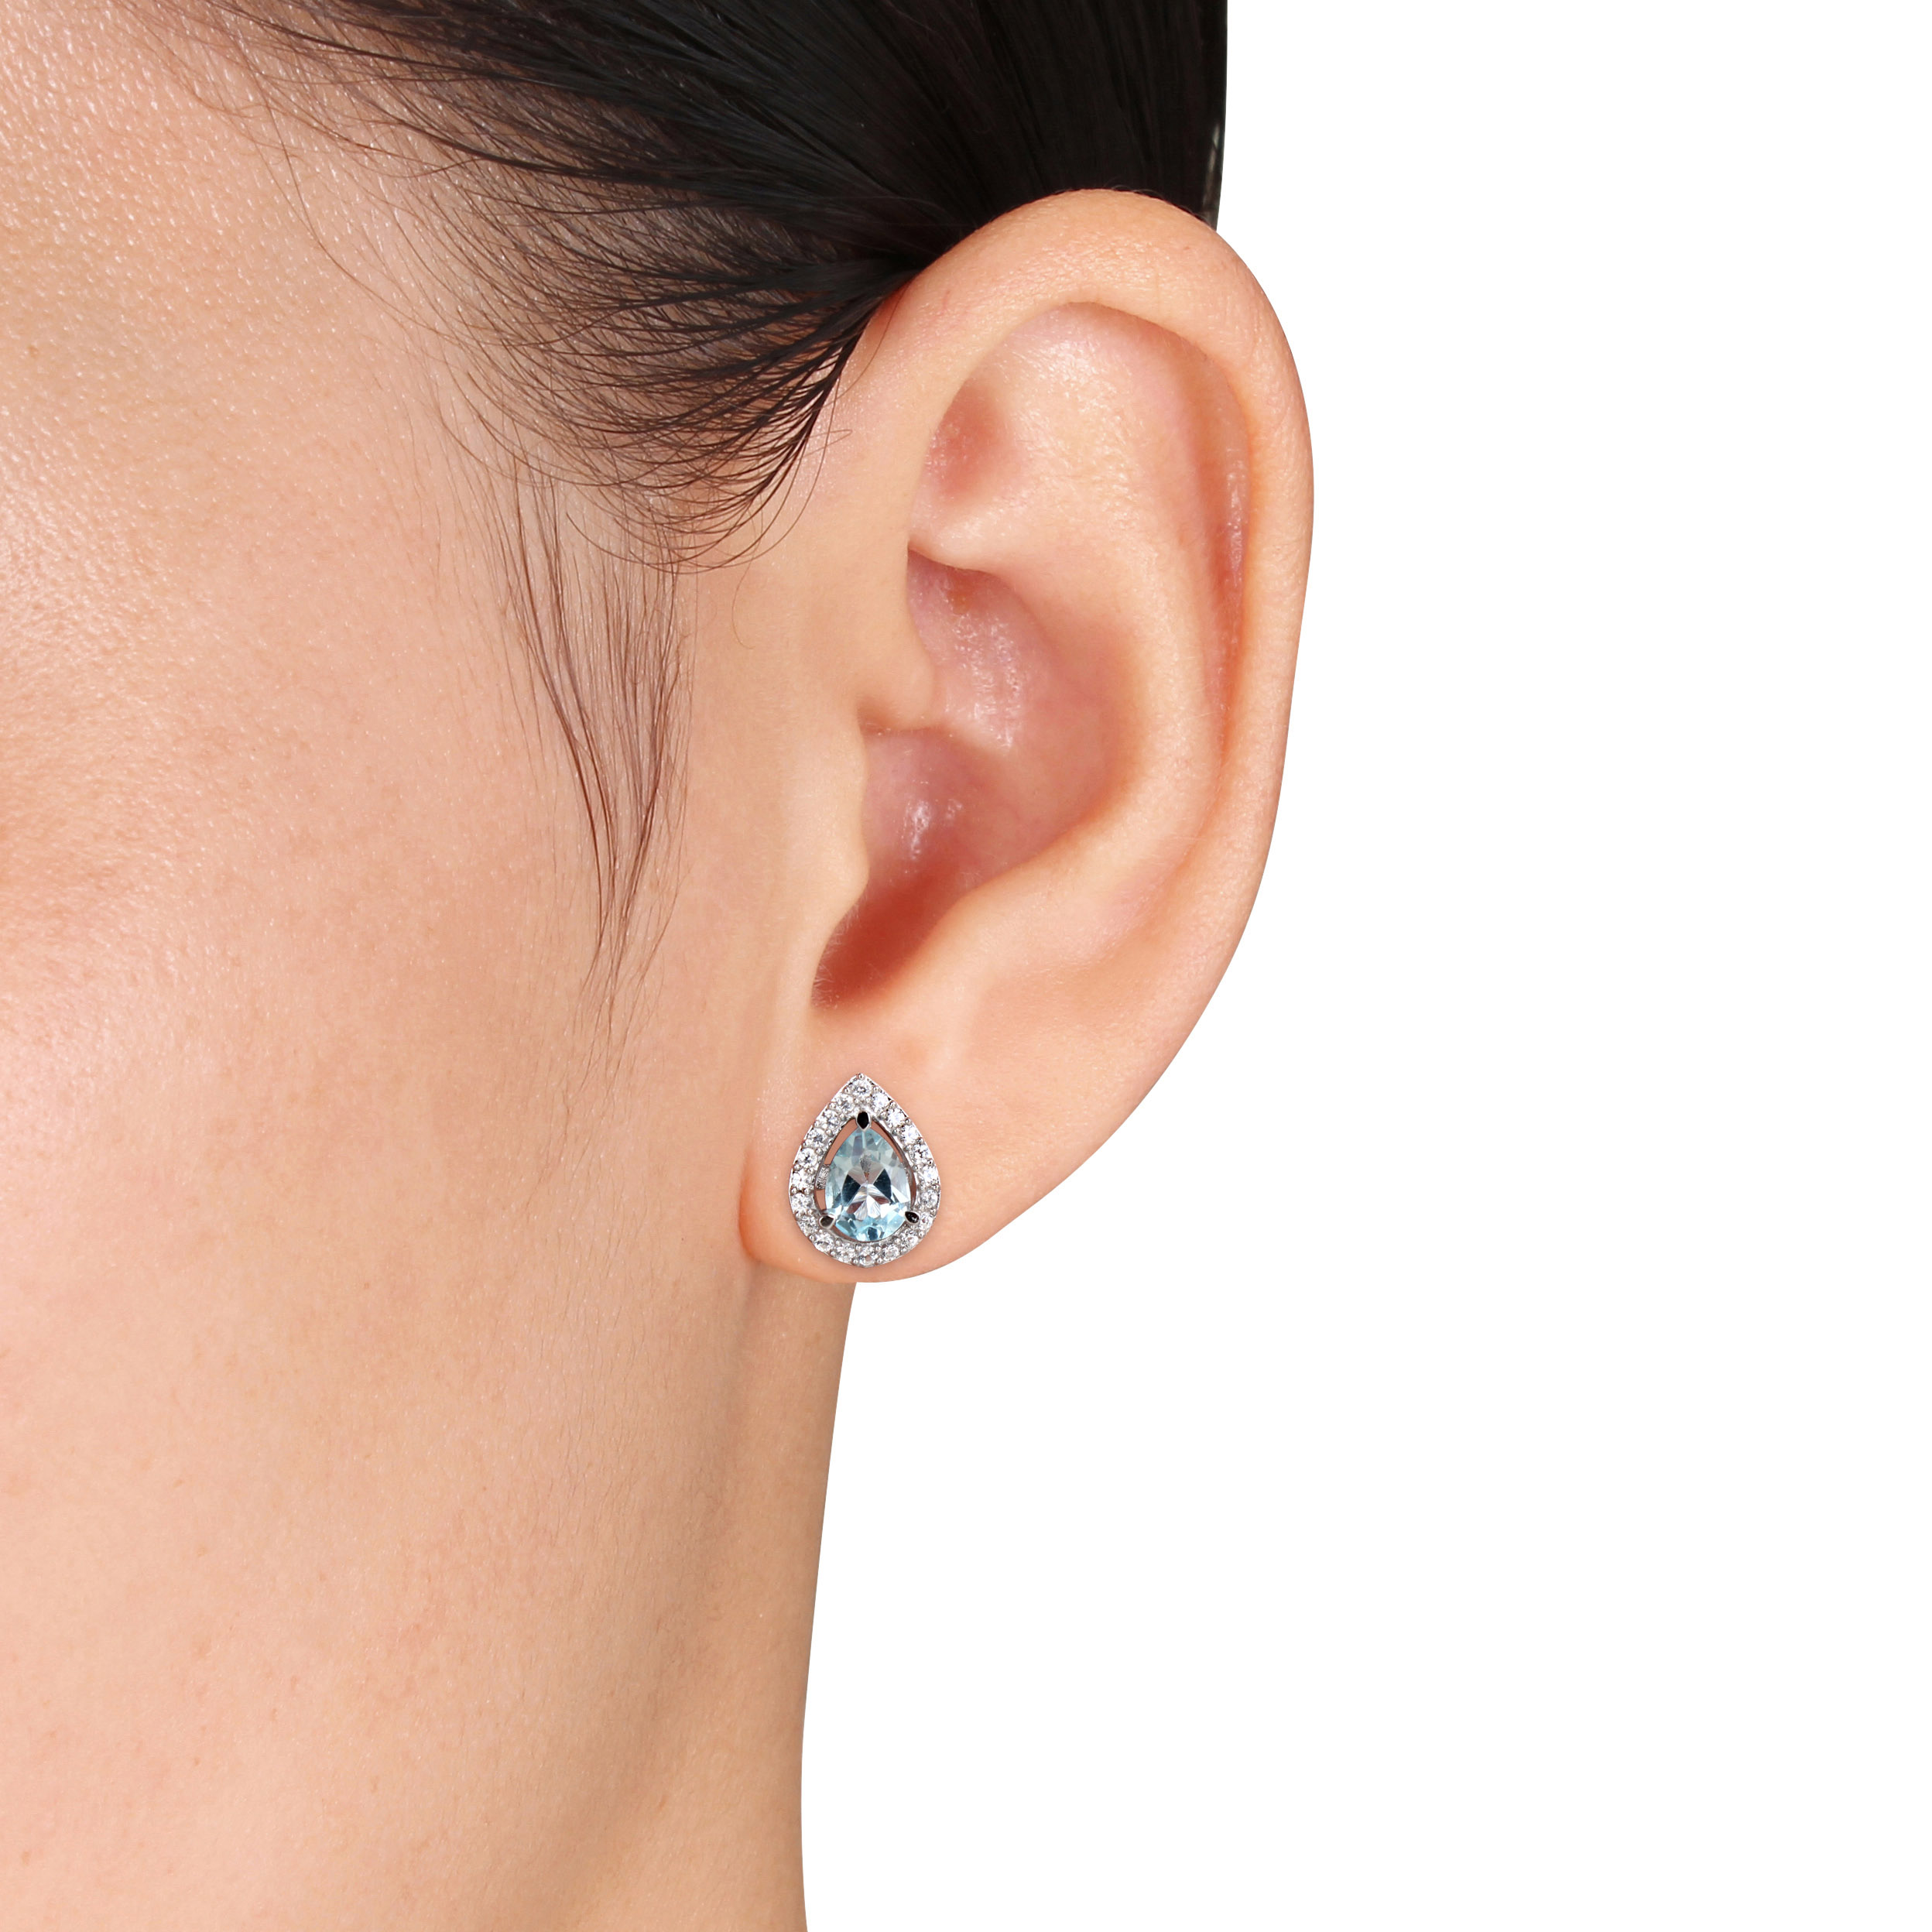 Blue Topaz and Created White Sapphire Teardrop Earrings in Sterling Silver